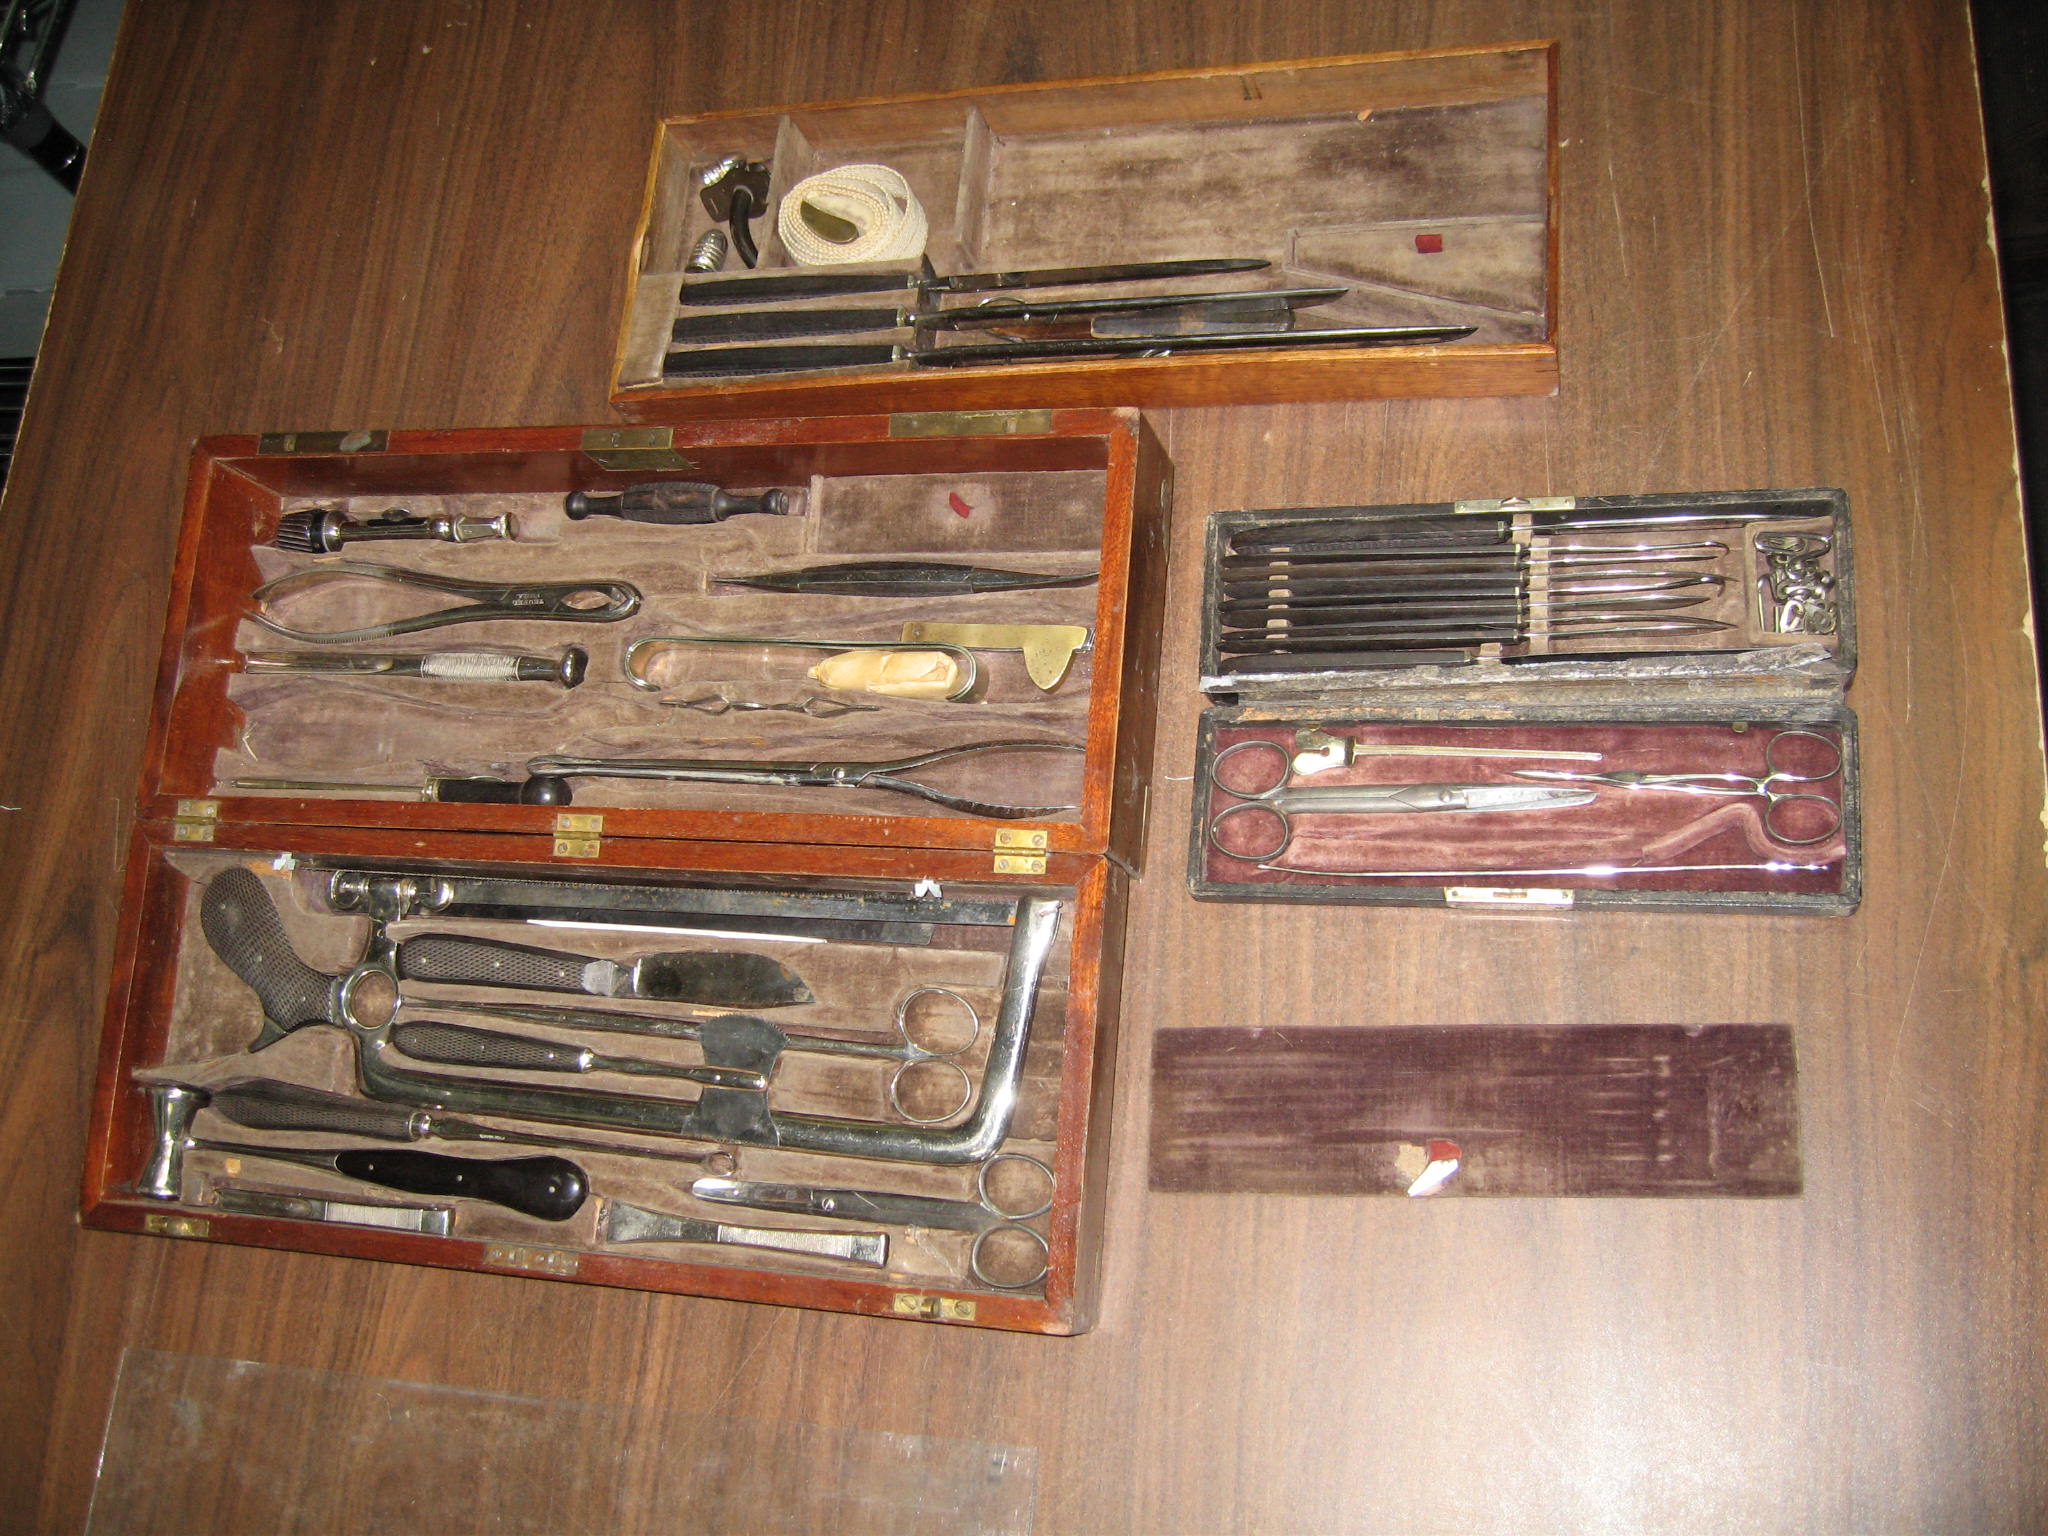 A box of tools used for surgery